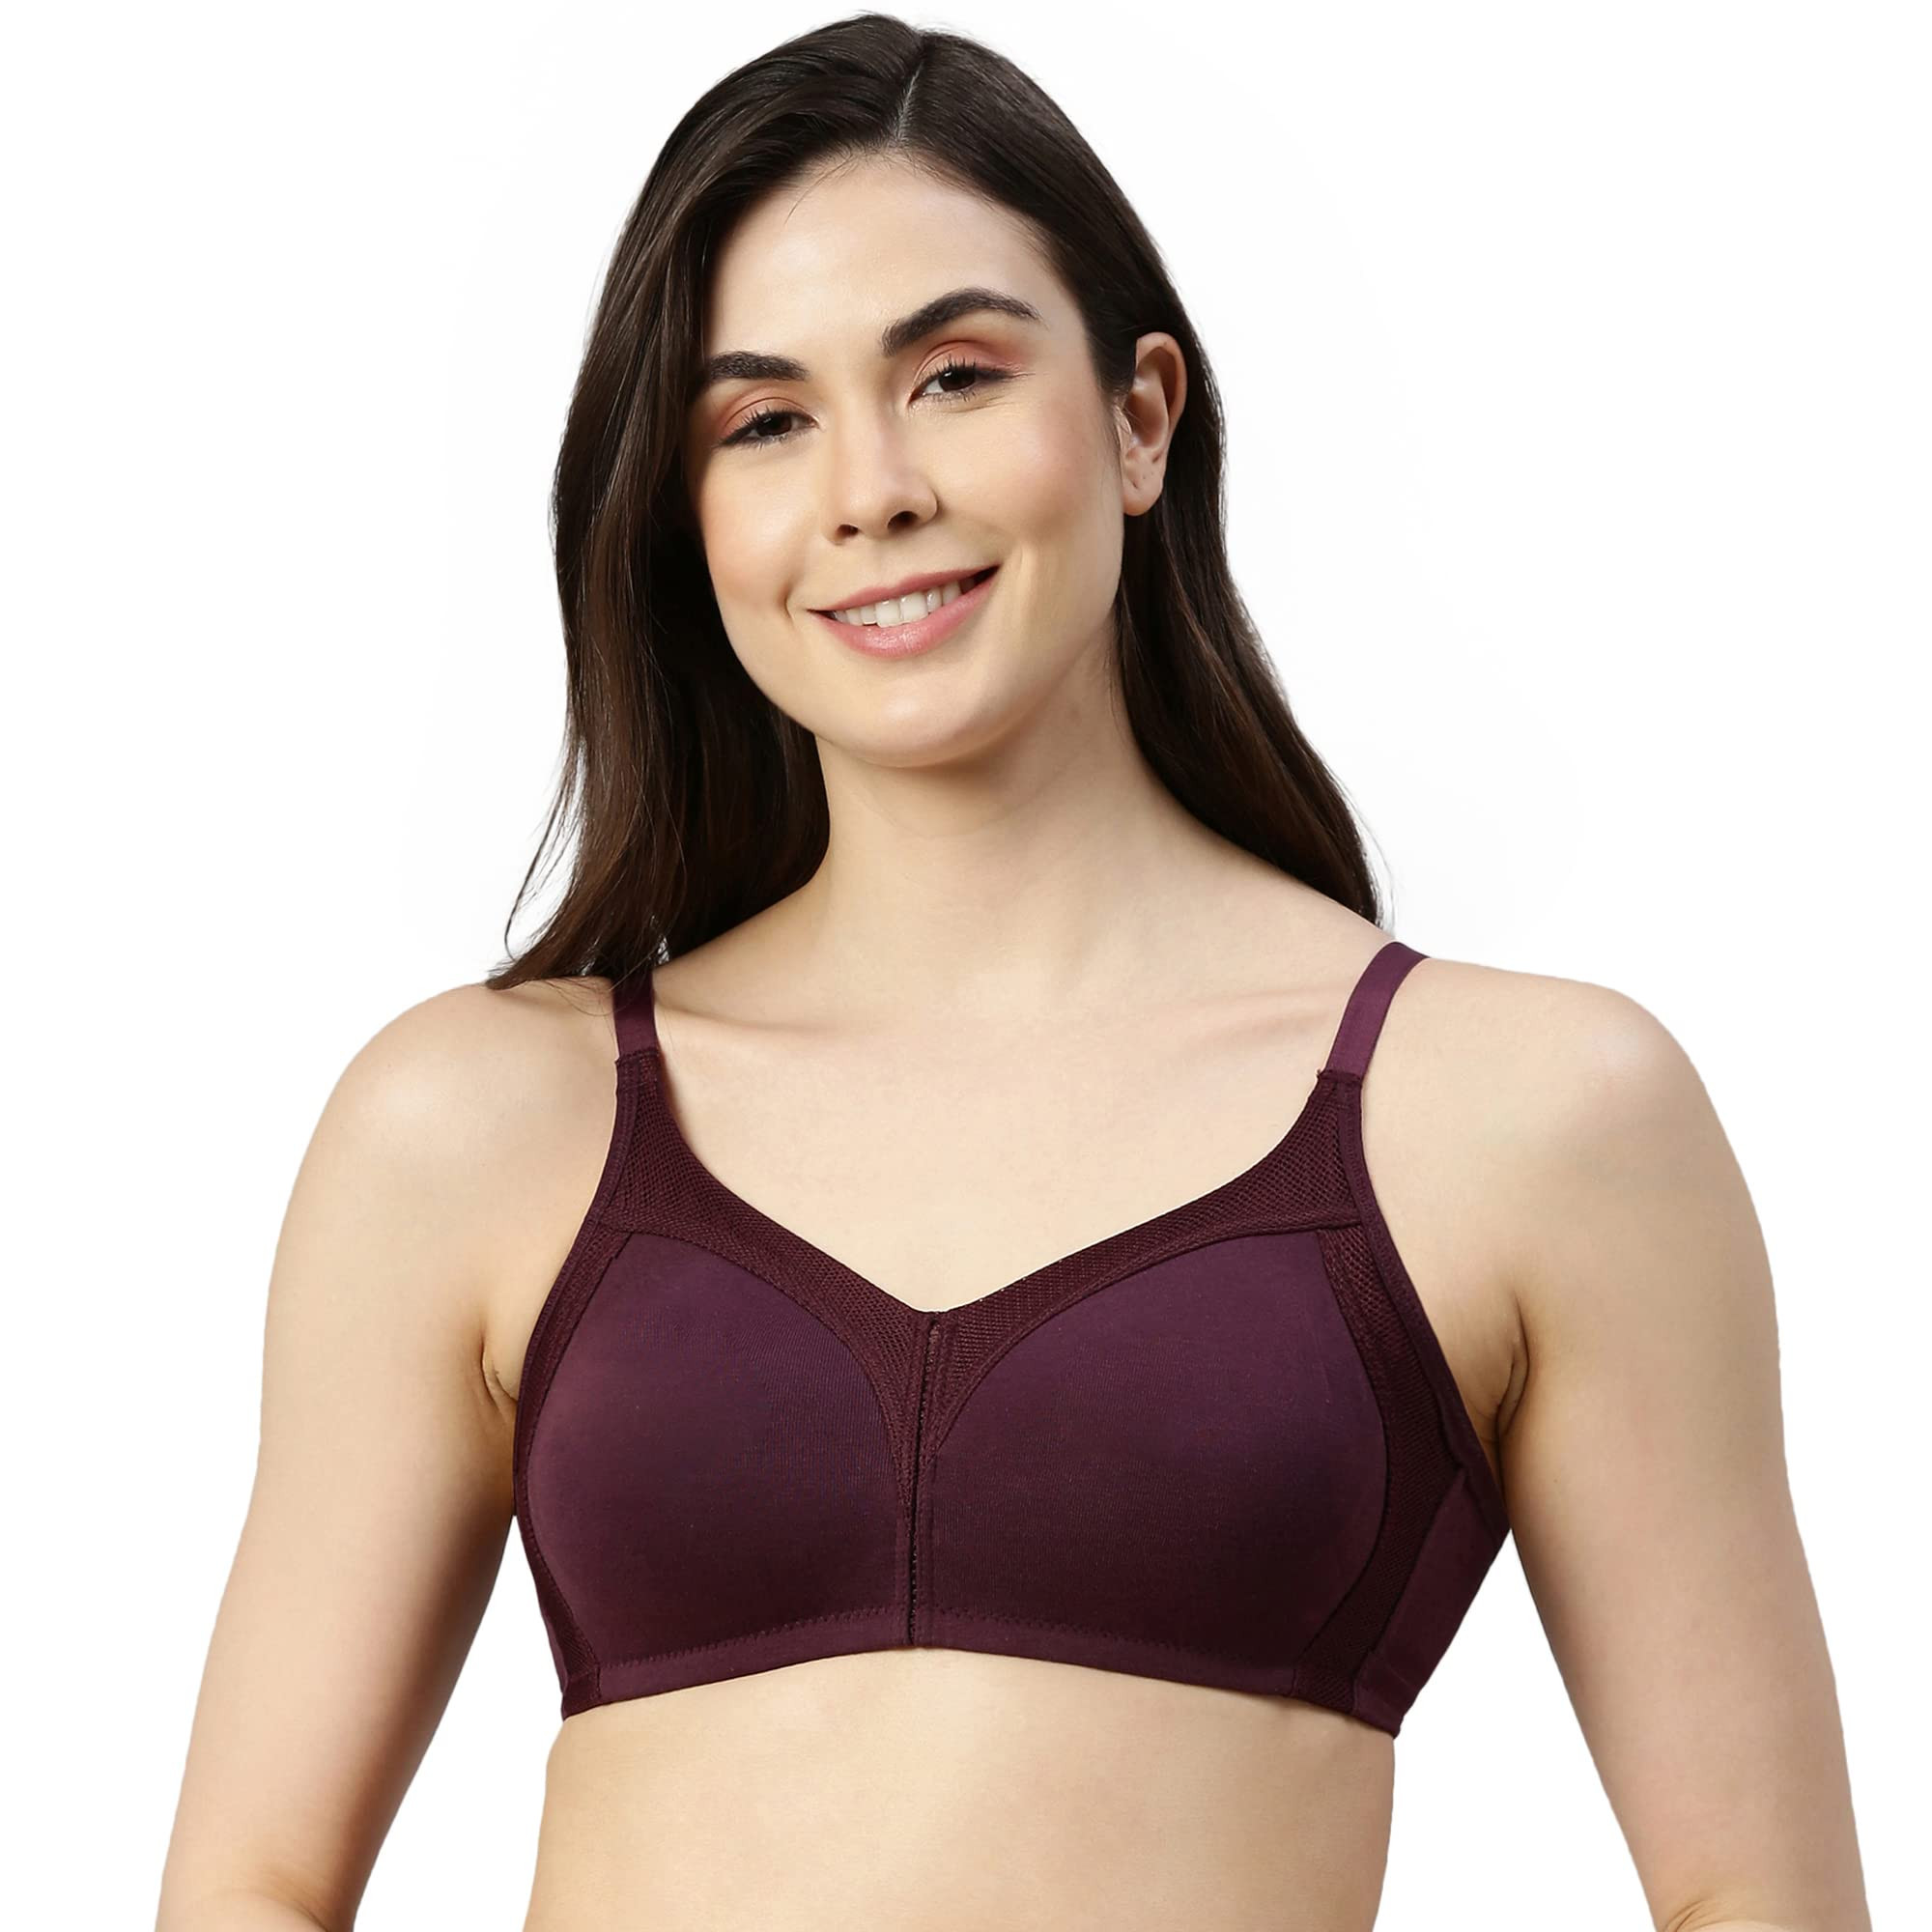 Enamor Women's Contour Synthetic High Impected Padded Wire Free